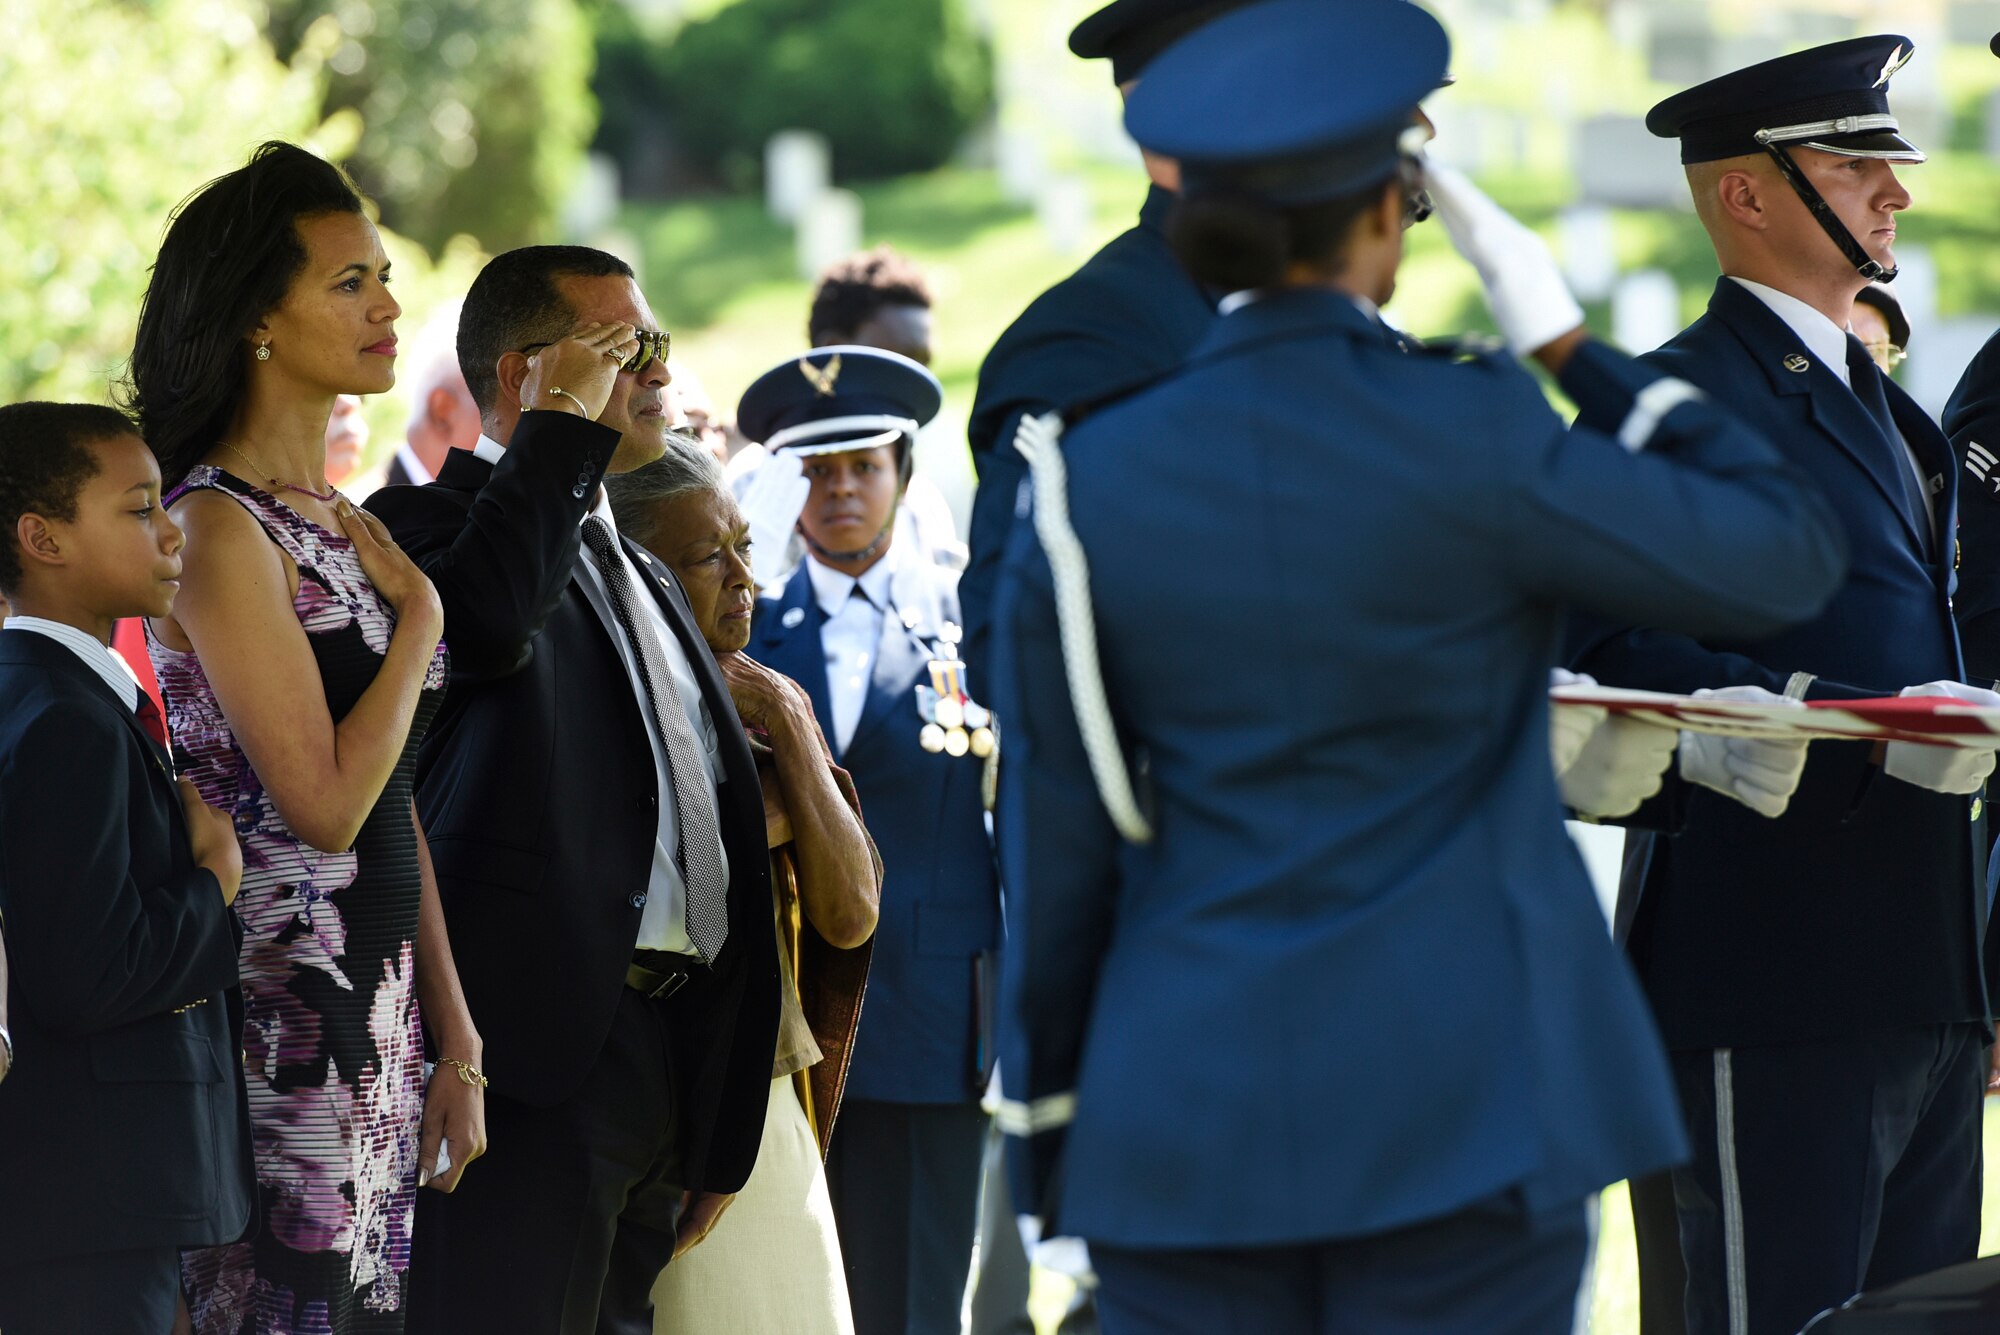 The family of former 2nd Lt. Malvin G. Whitfield, an Army Air Forces and Air Force veteran, stands during the playing of taps at Whitfield’s graveside ceremony at the Arlington National Cemetery, Va., June 8, 2016. He died Nov. 19, 2015, at the age of 91. (U.S. Air Force photo/Staff Sgt. Alyssa C. Gibson)